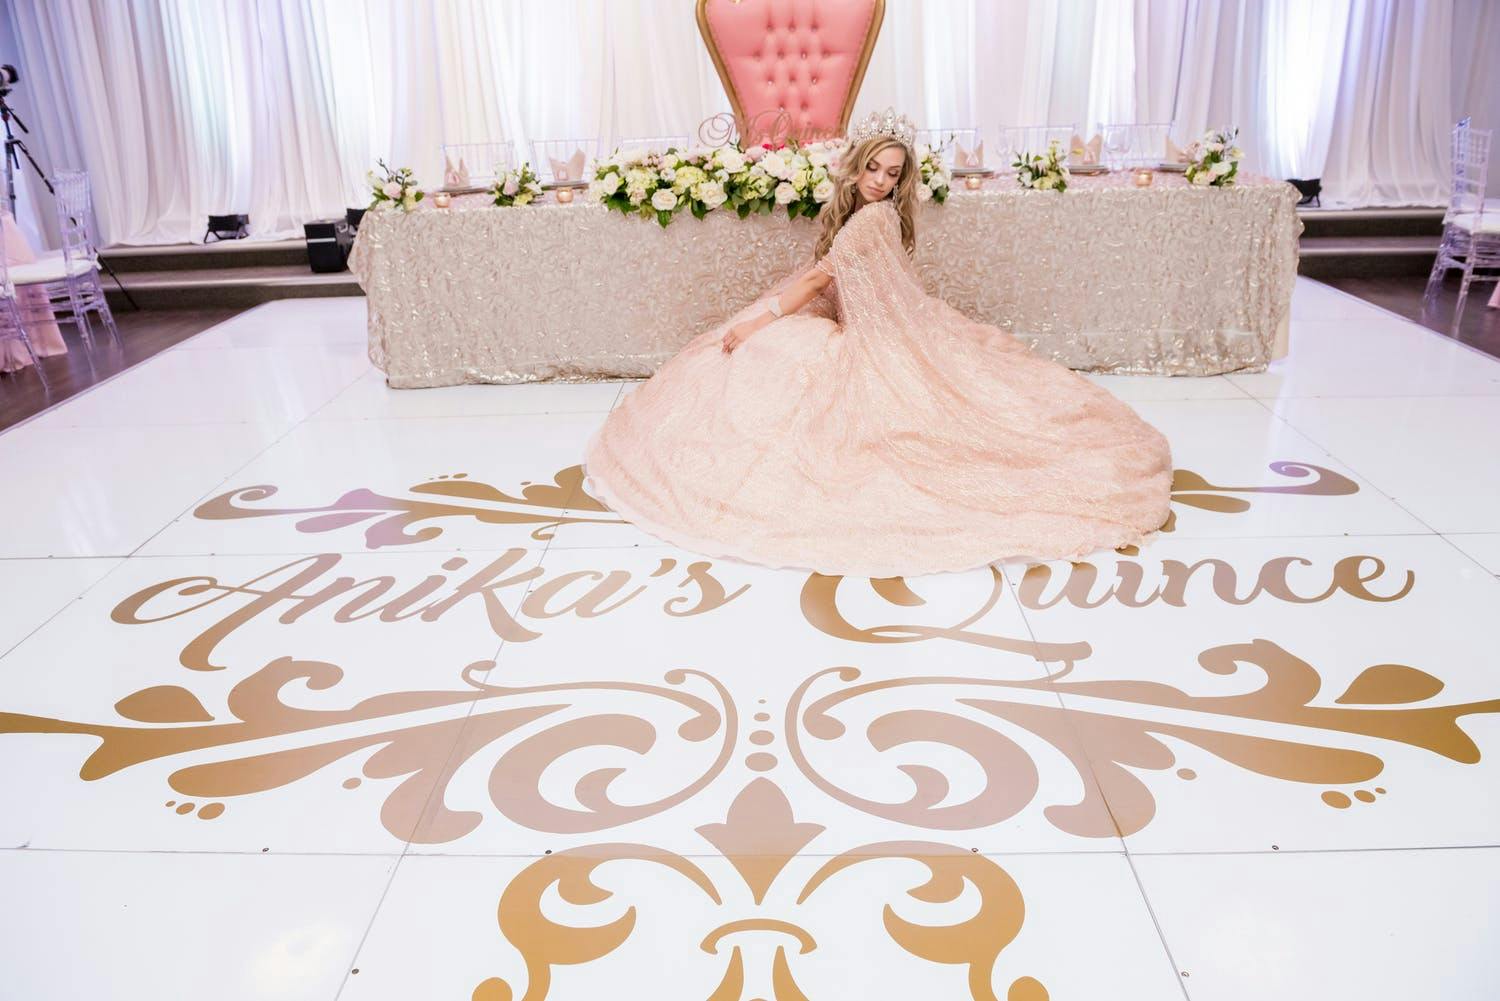 Quinceañera in rose-gold dress sits on white dance floor with gold writing and in front of rose-gold reception table | PartySlate